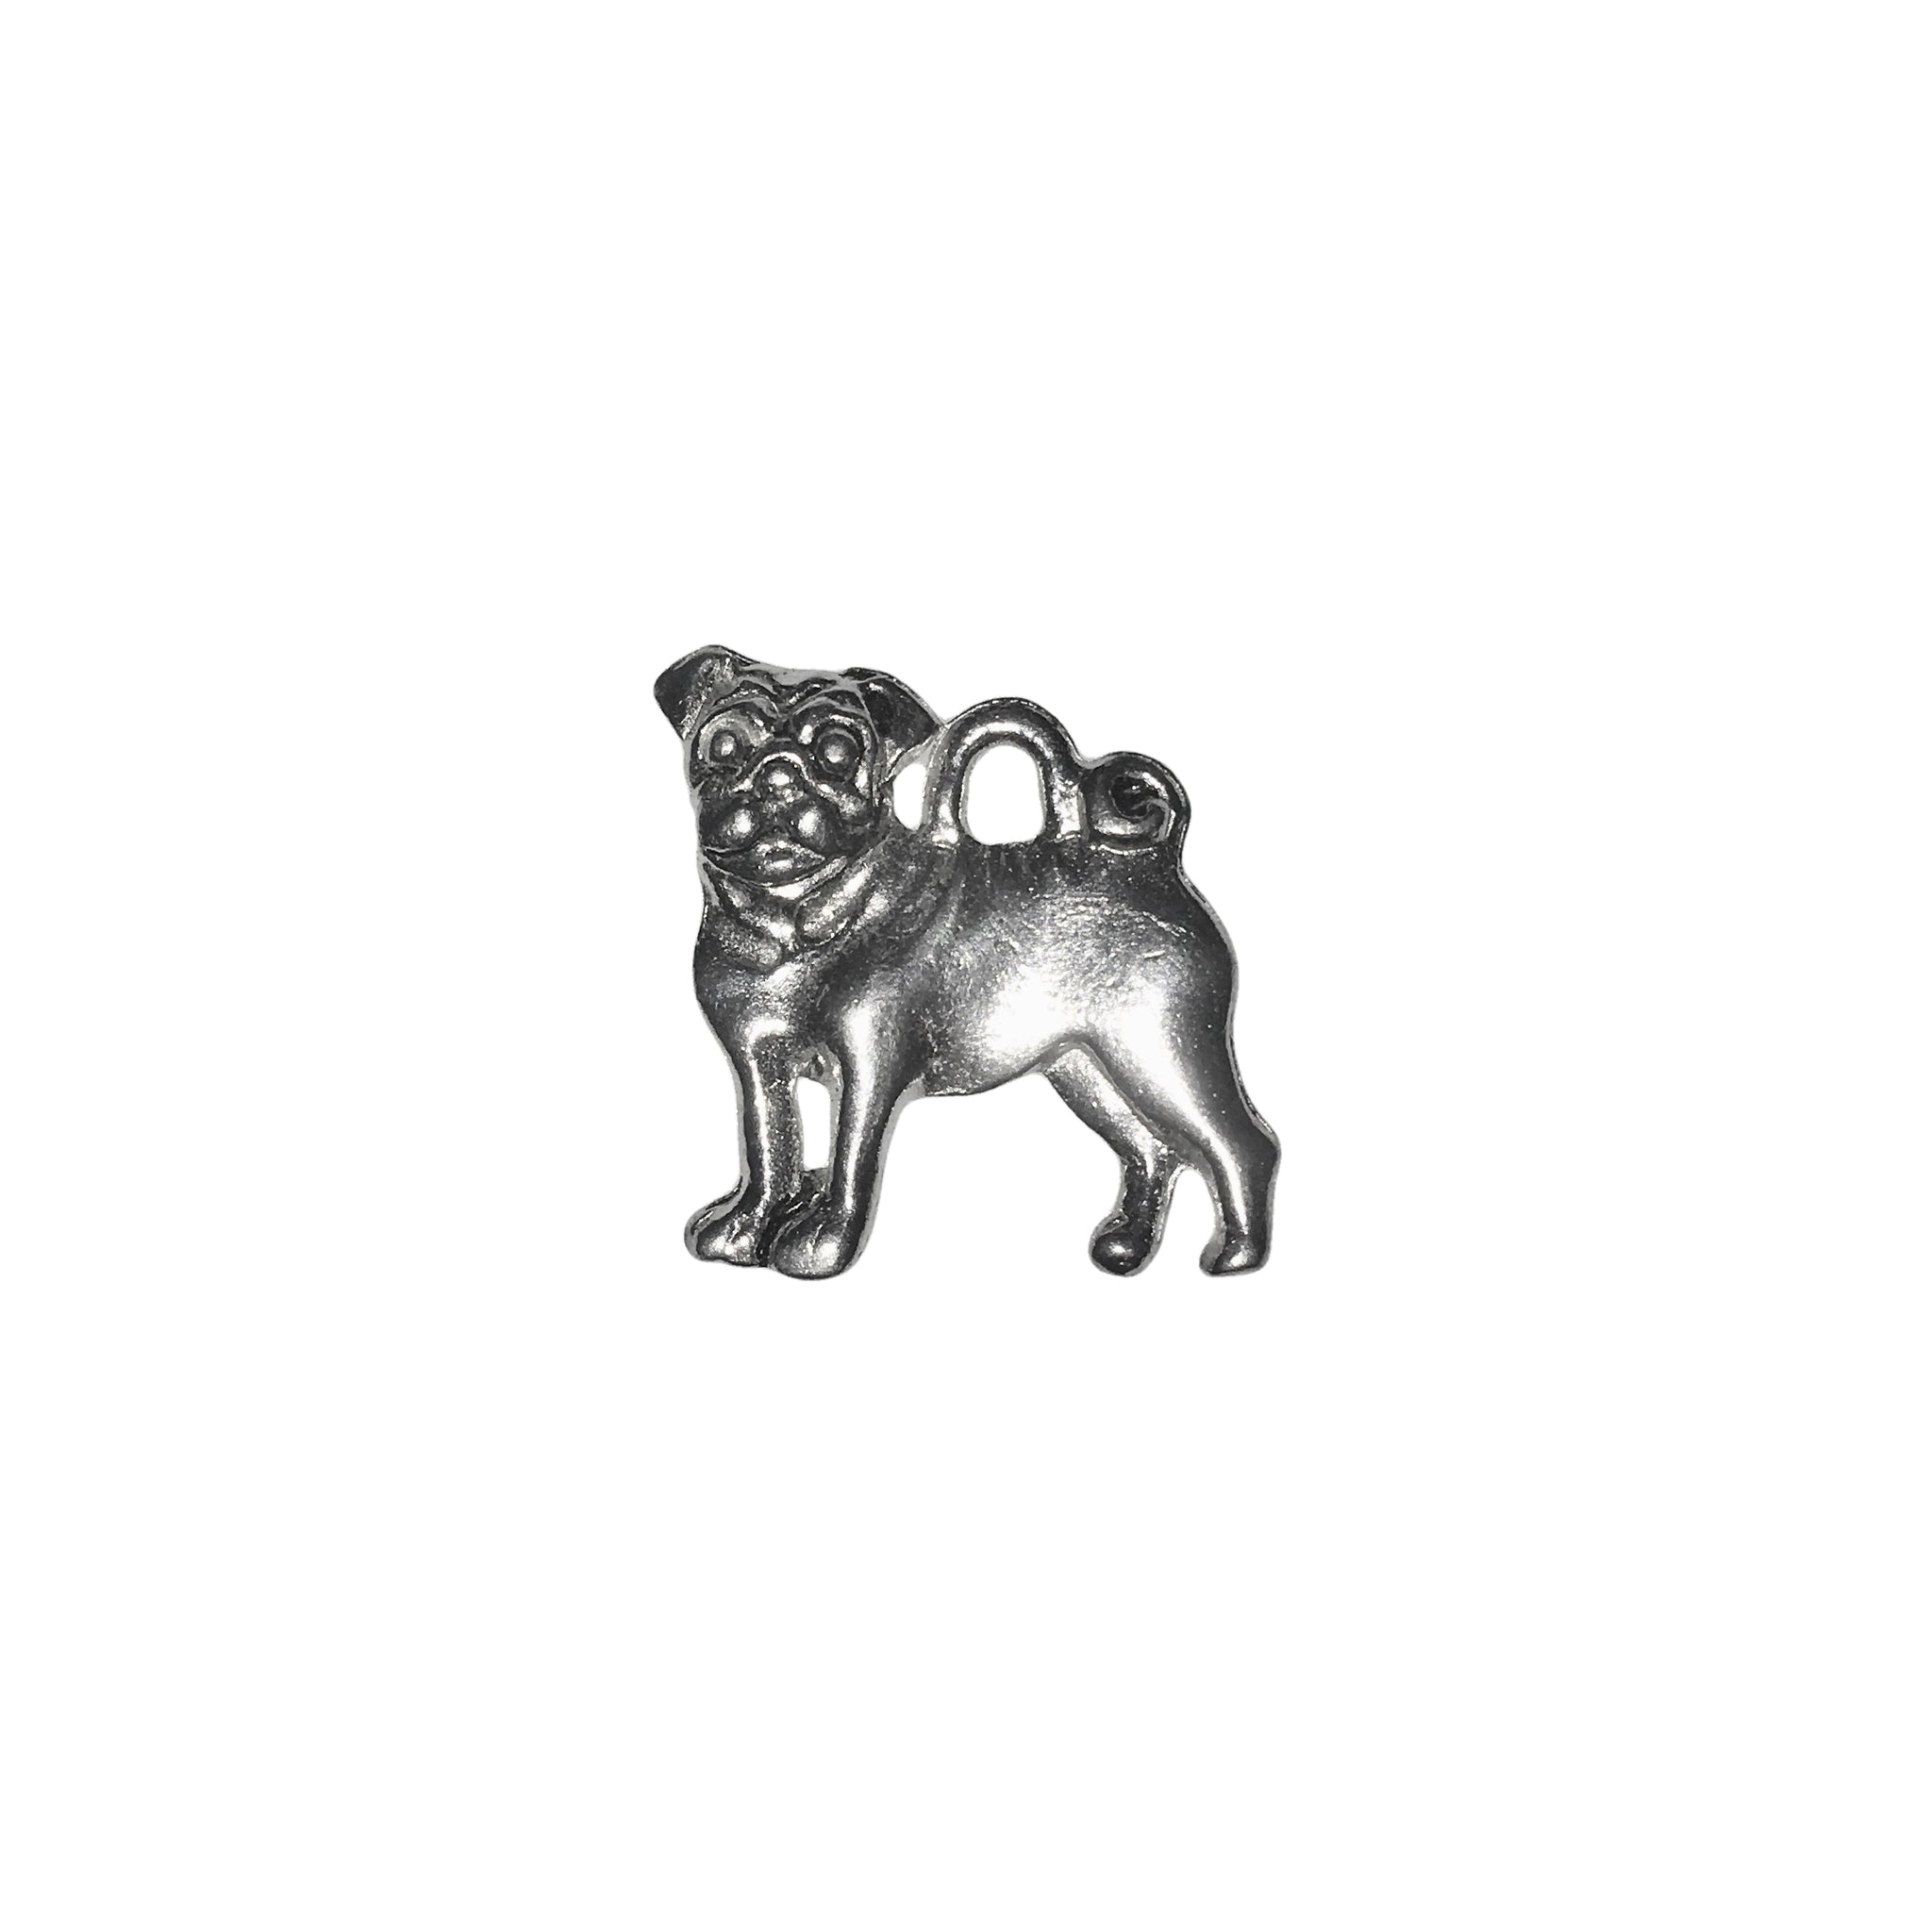 Pug Dog Charms - Qty 5 - Lead Free Pewter Silver - American Made